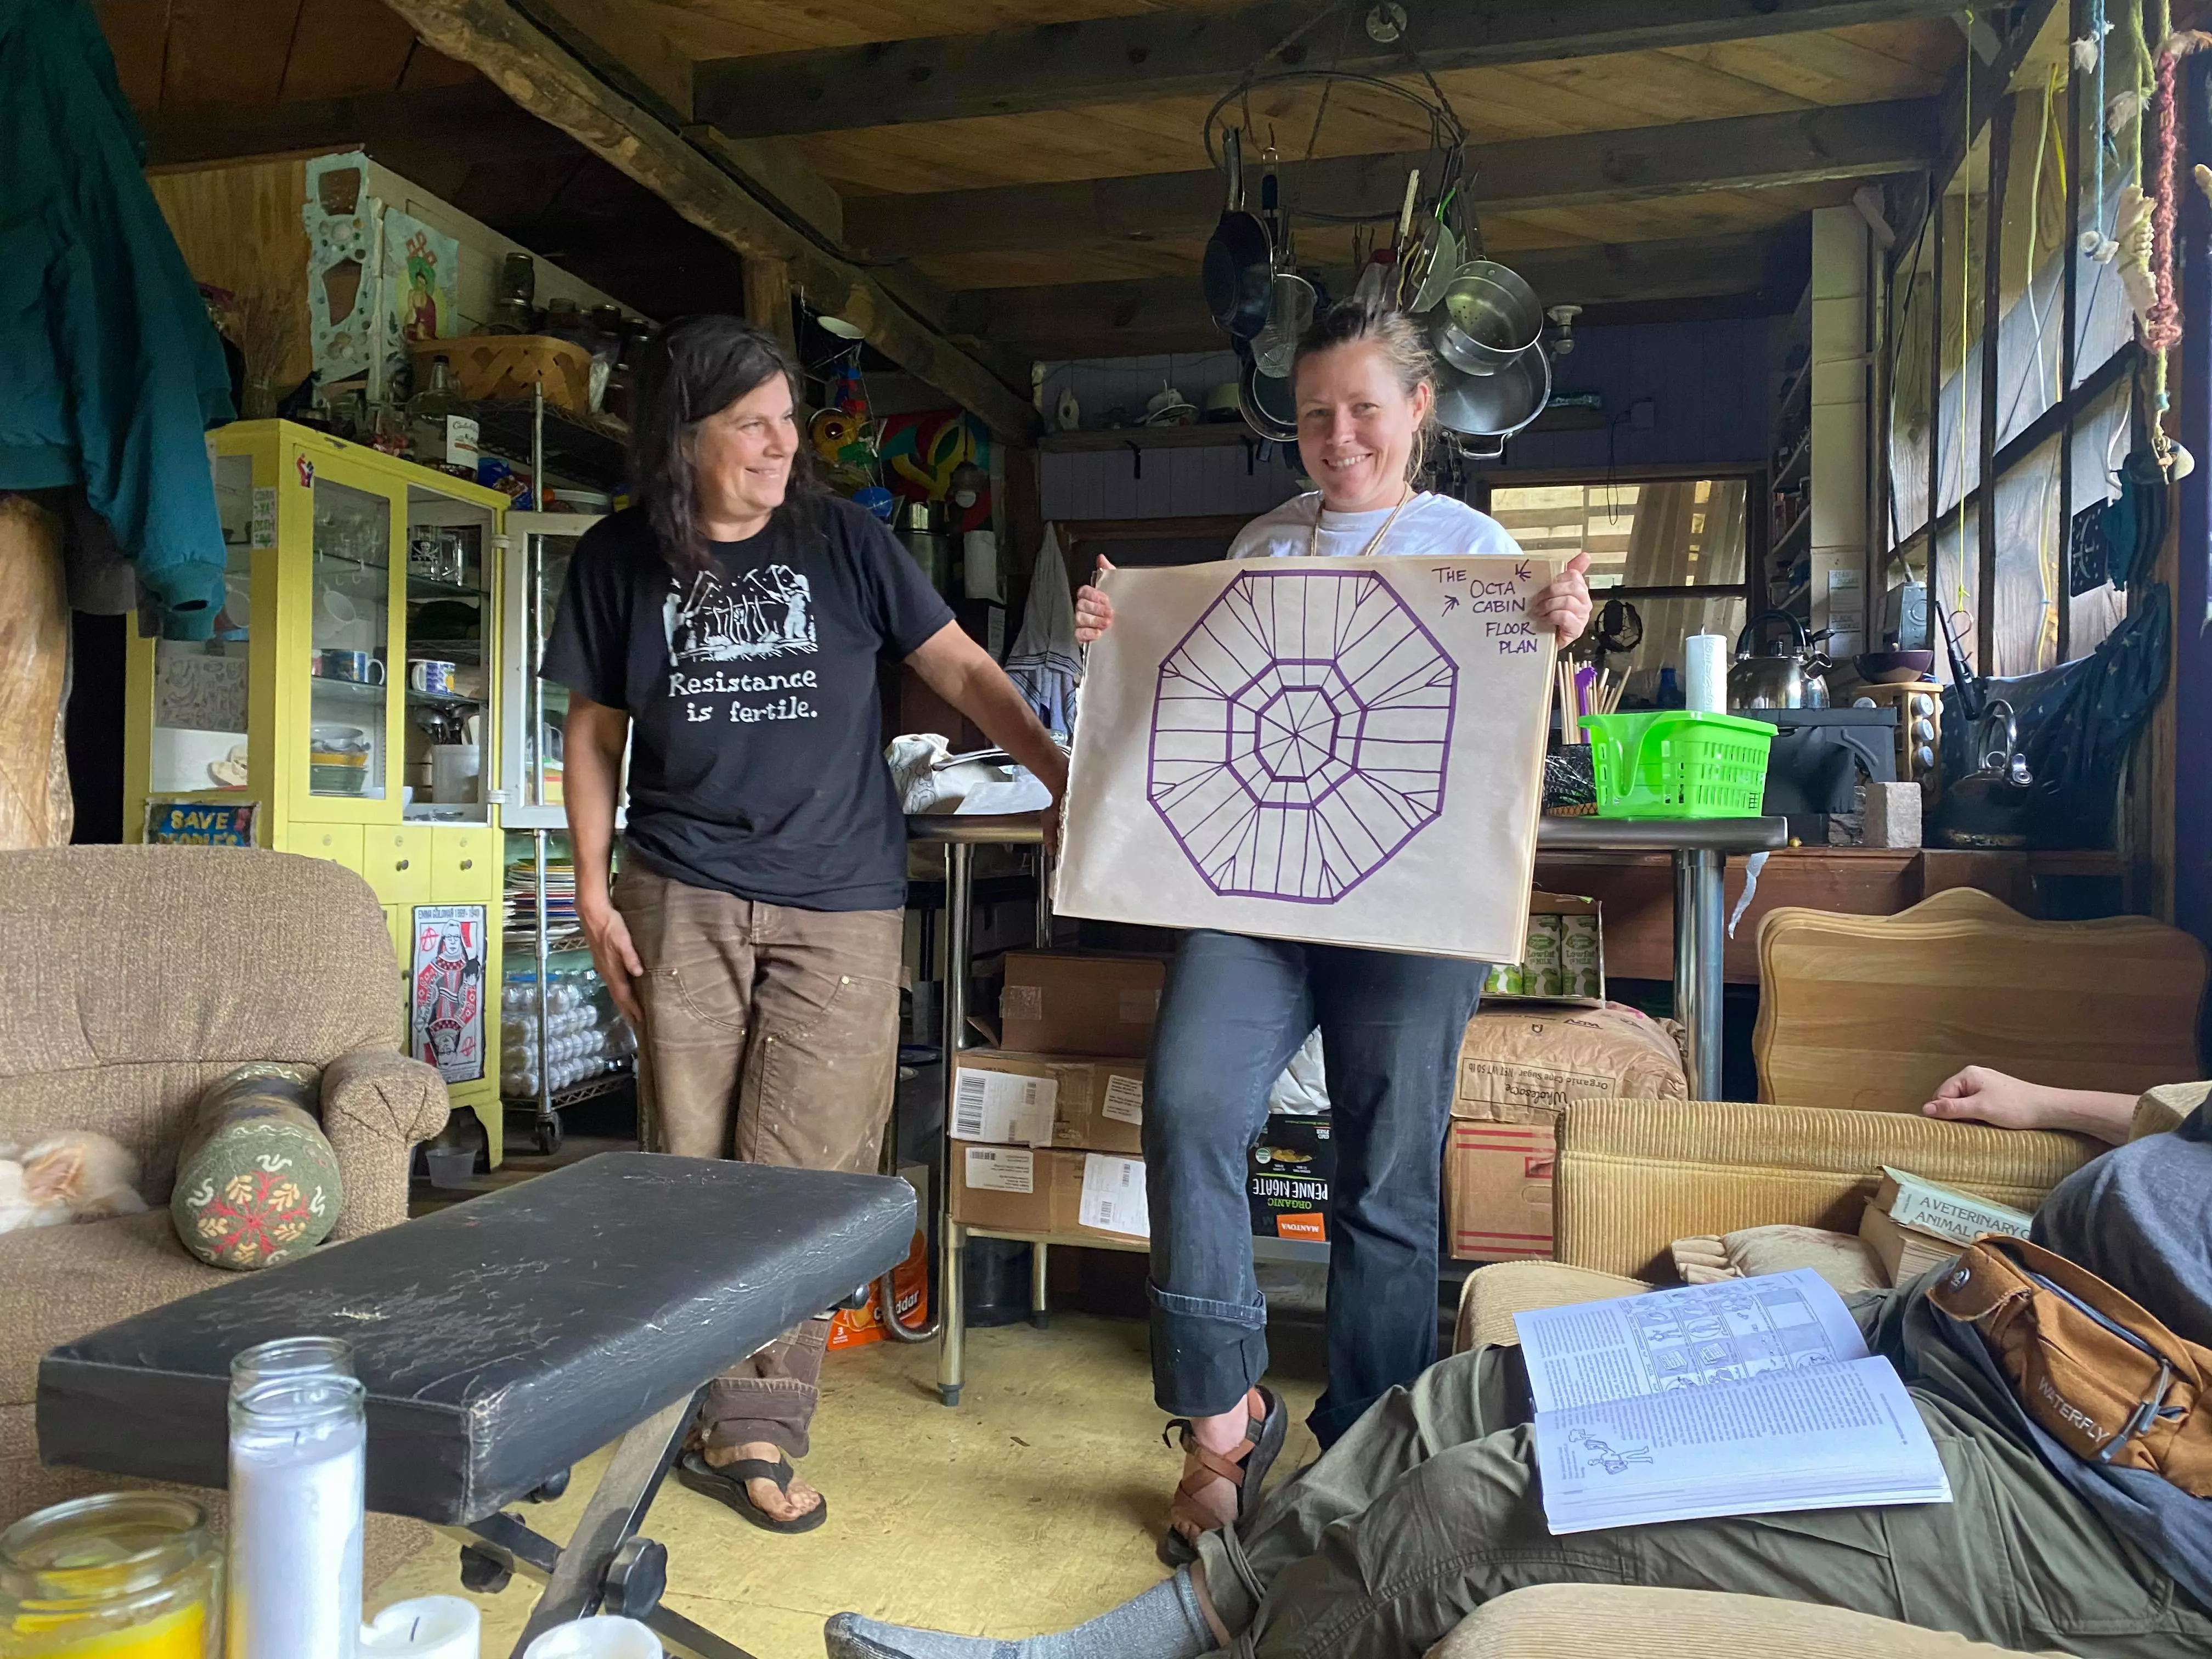 The two women who own the farm, showing off the floor plan of a cabin we're building!